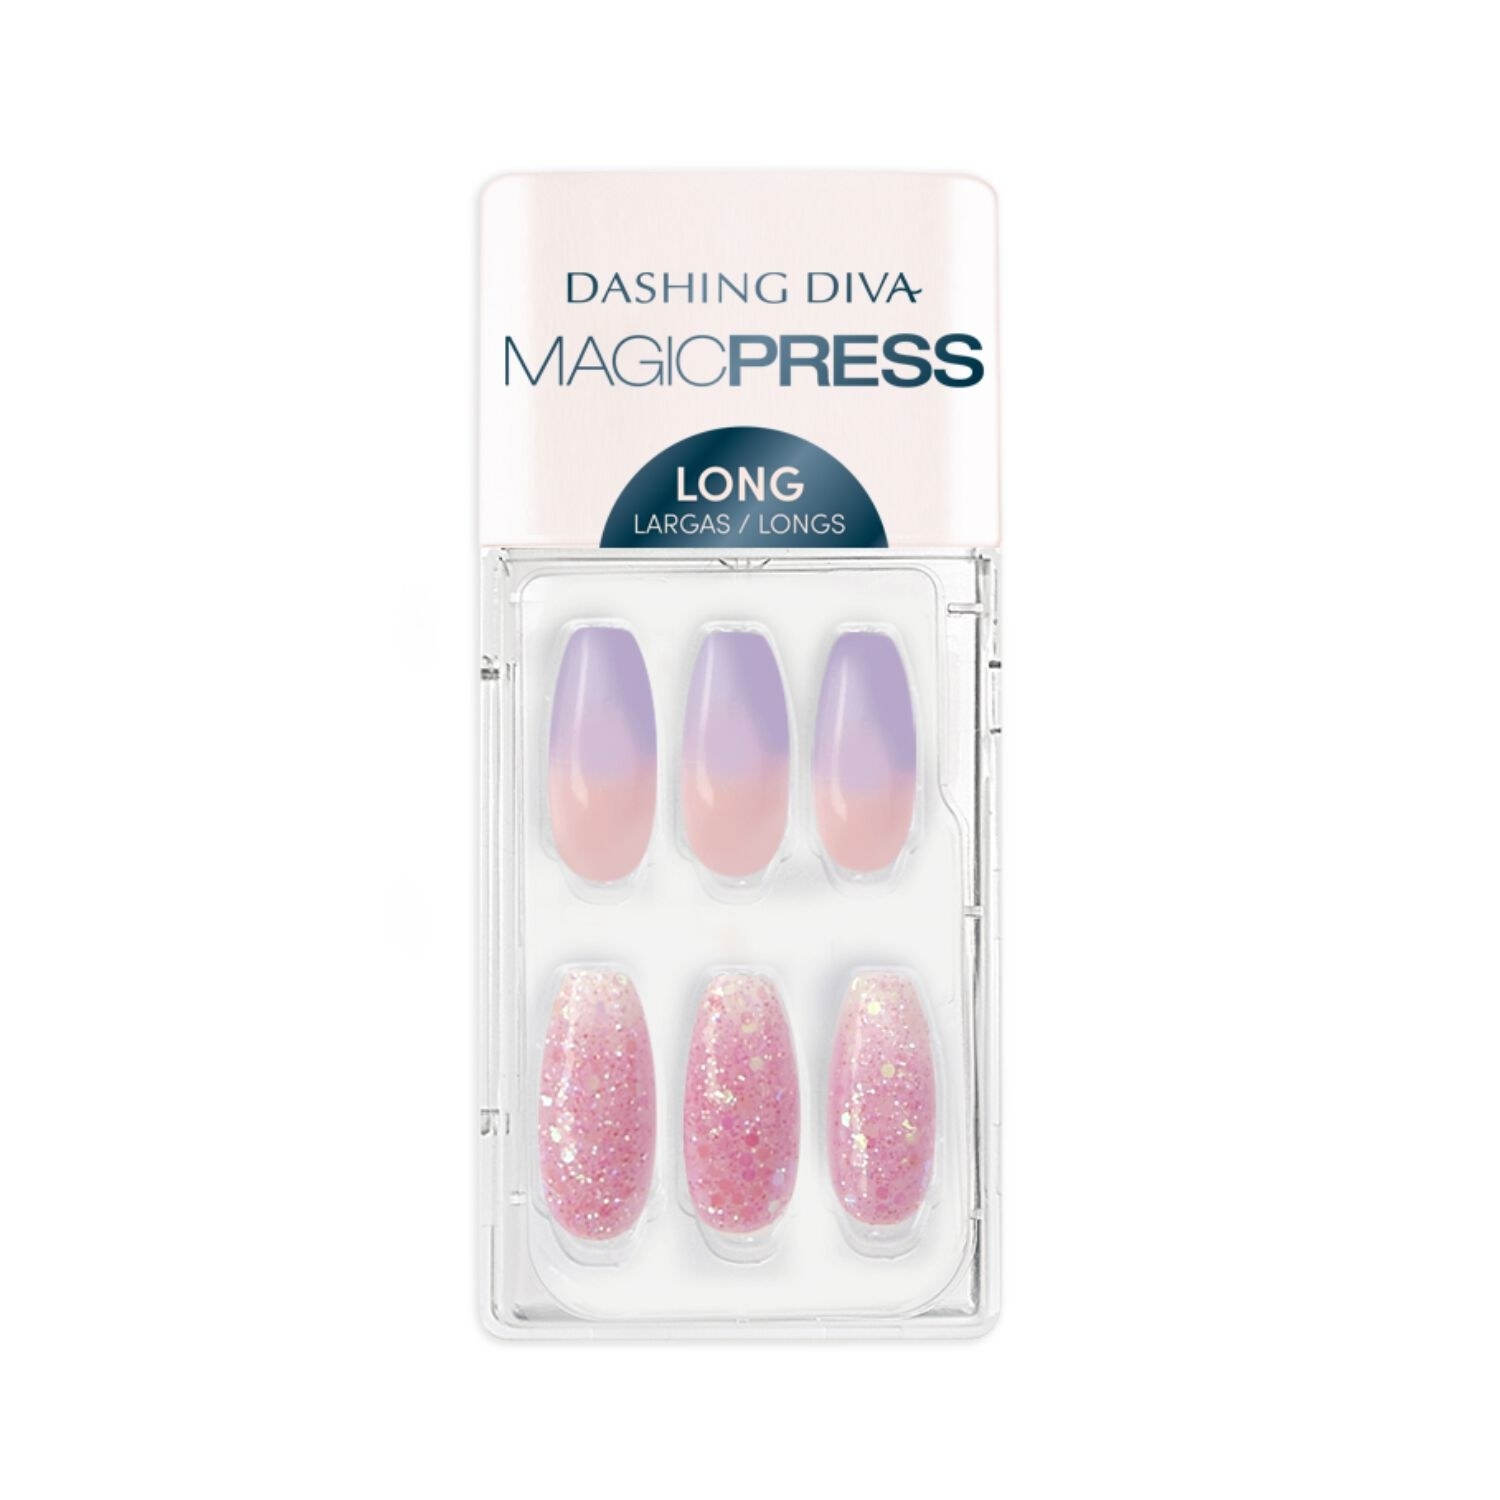 Pack of press-on nails, six visible